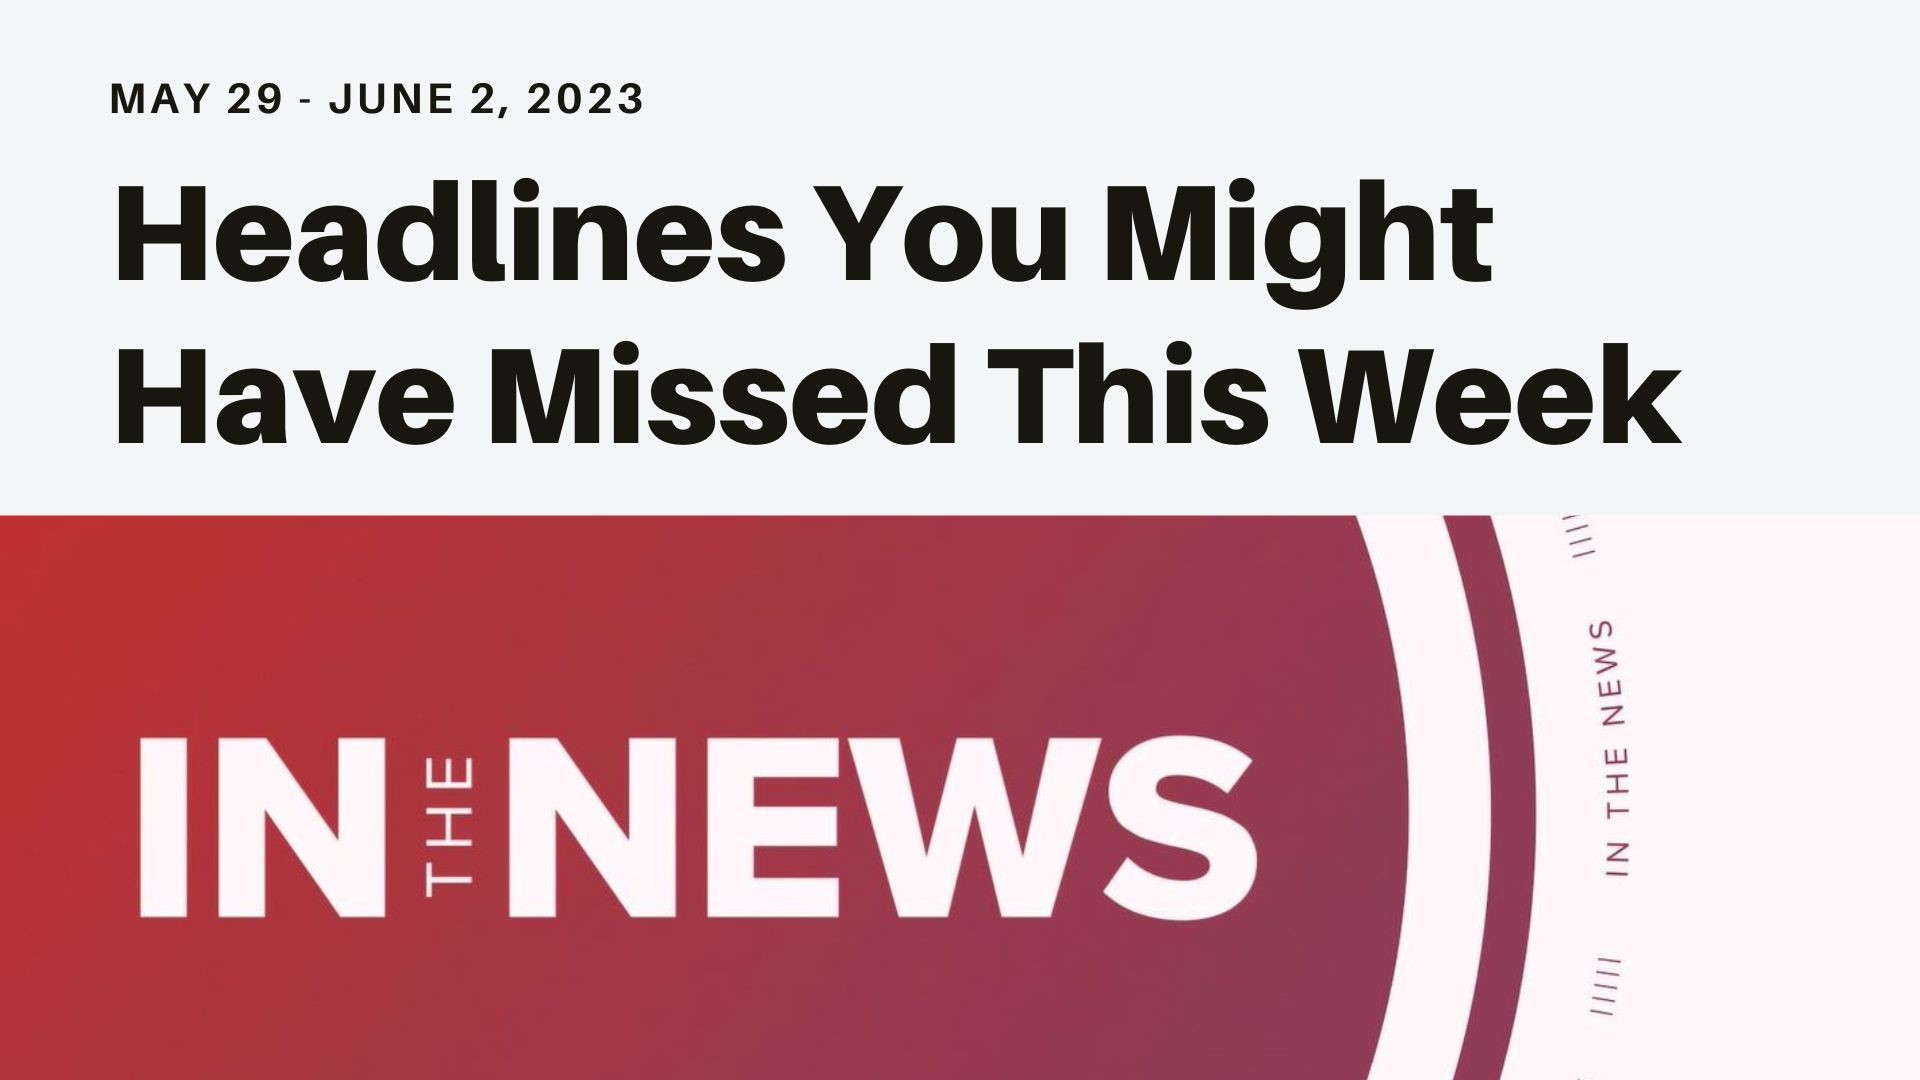 A look at the news you might have missed this week for Elizabeth Holmes going to prison to Rosalynn Carter's dementia diagnosis and AI tech concerns.